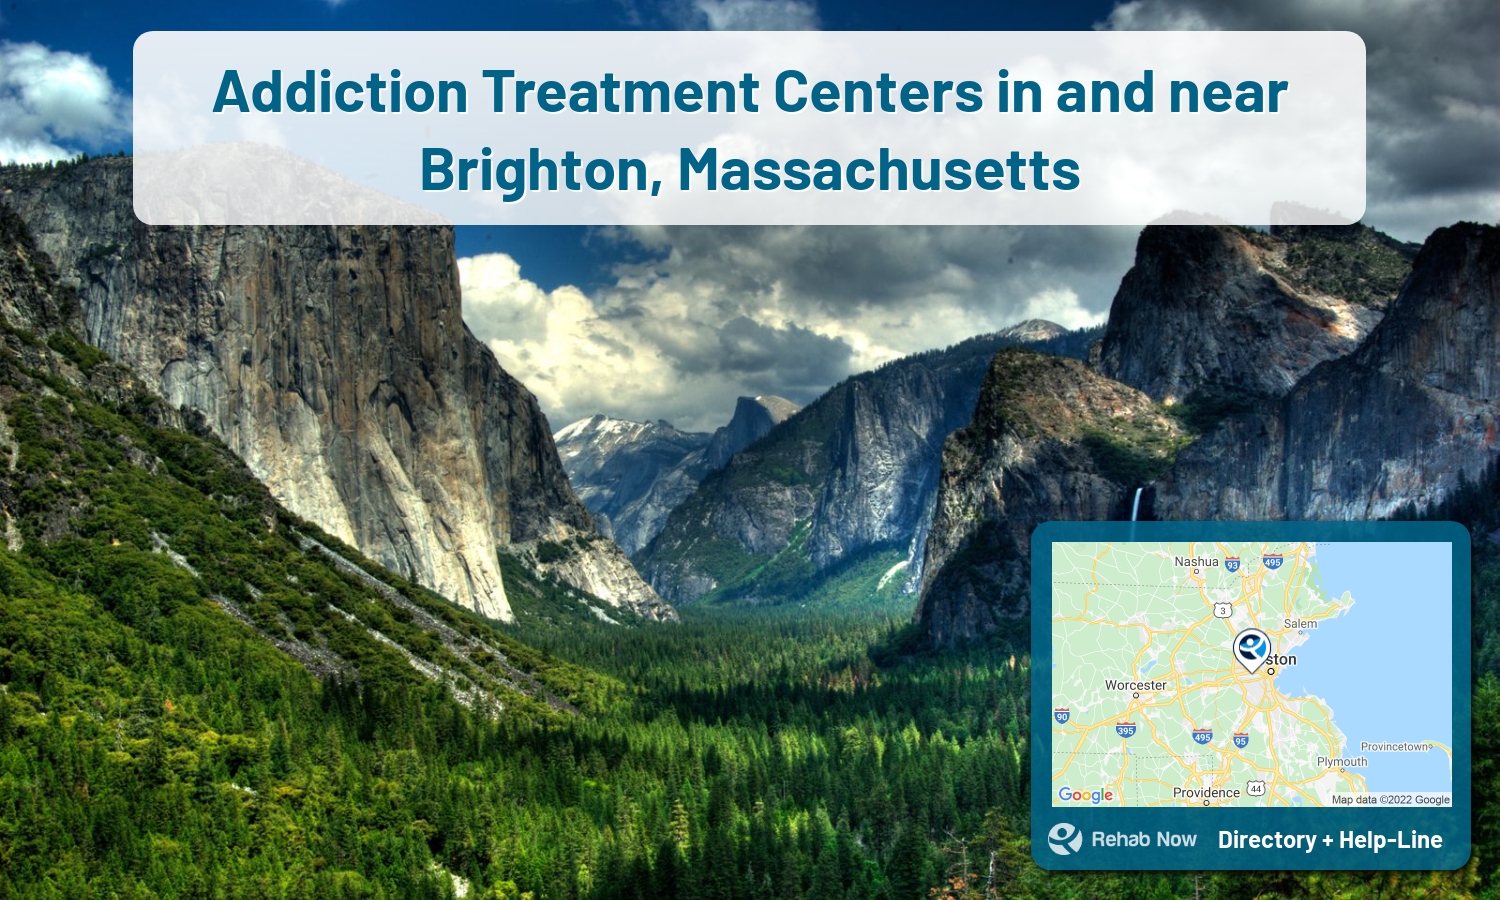 Drug rehab and alcohol treatment services nearby Brighton, MA. Need help choosing a treatment program? Call our free hotline!